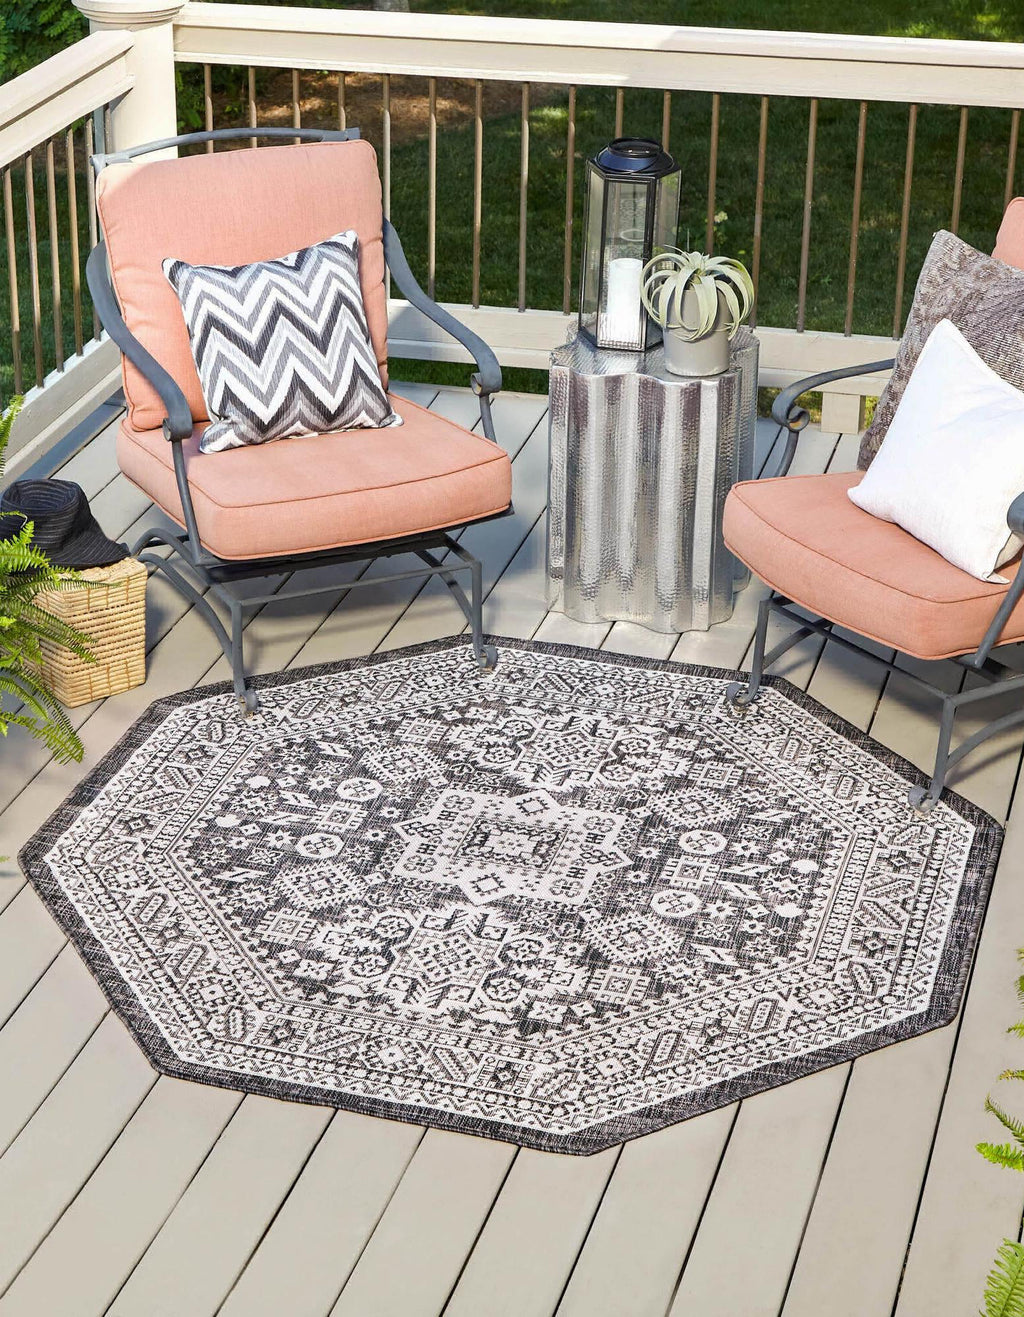 Unique Loom Outdoor Aztec T-KZOD17 Charcoal Gray Area Rug Octagon Lifestyle Image Feature